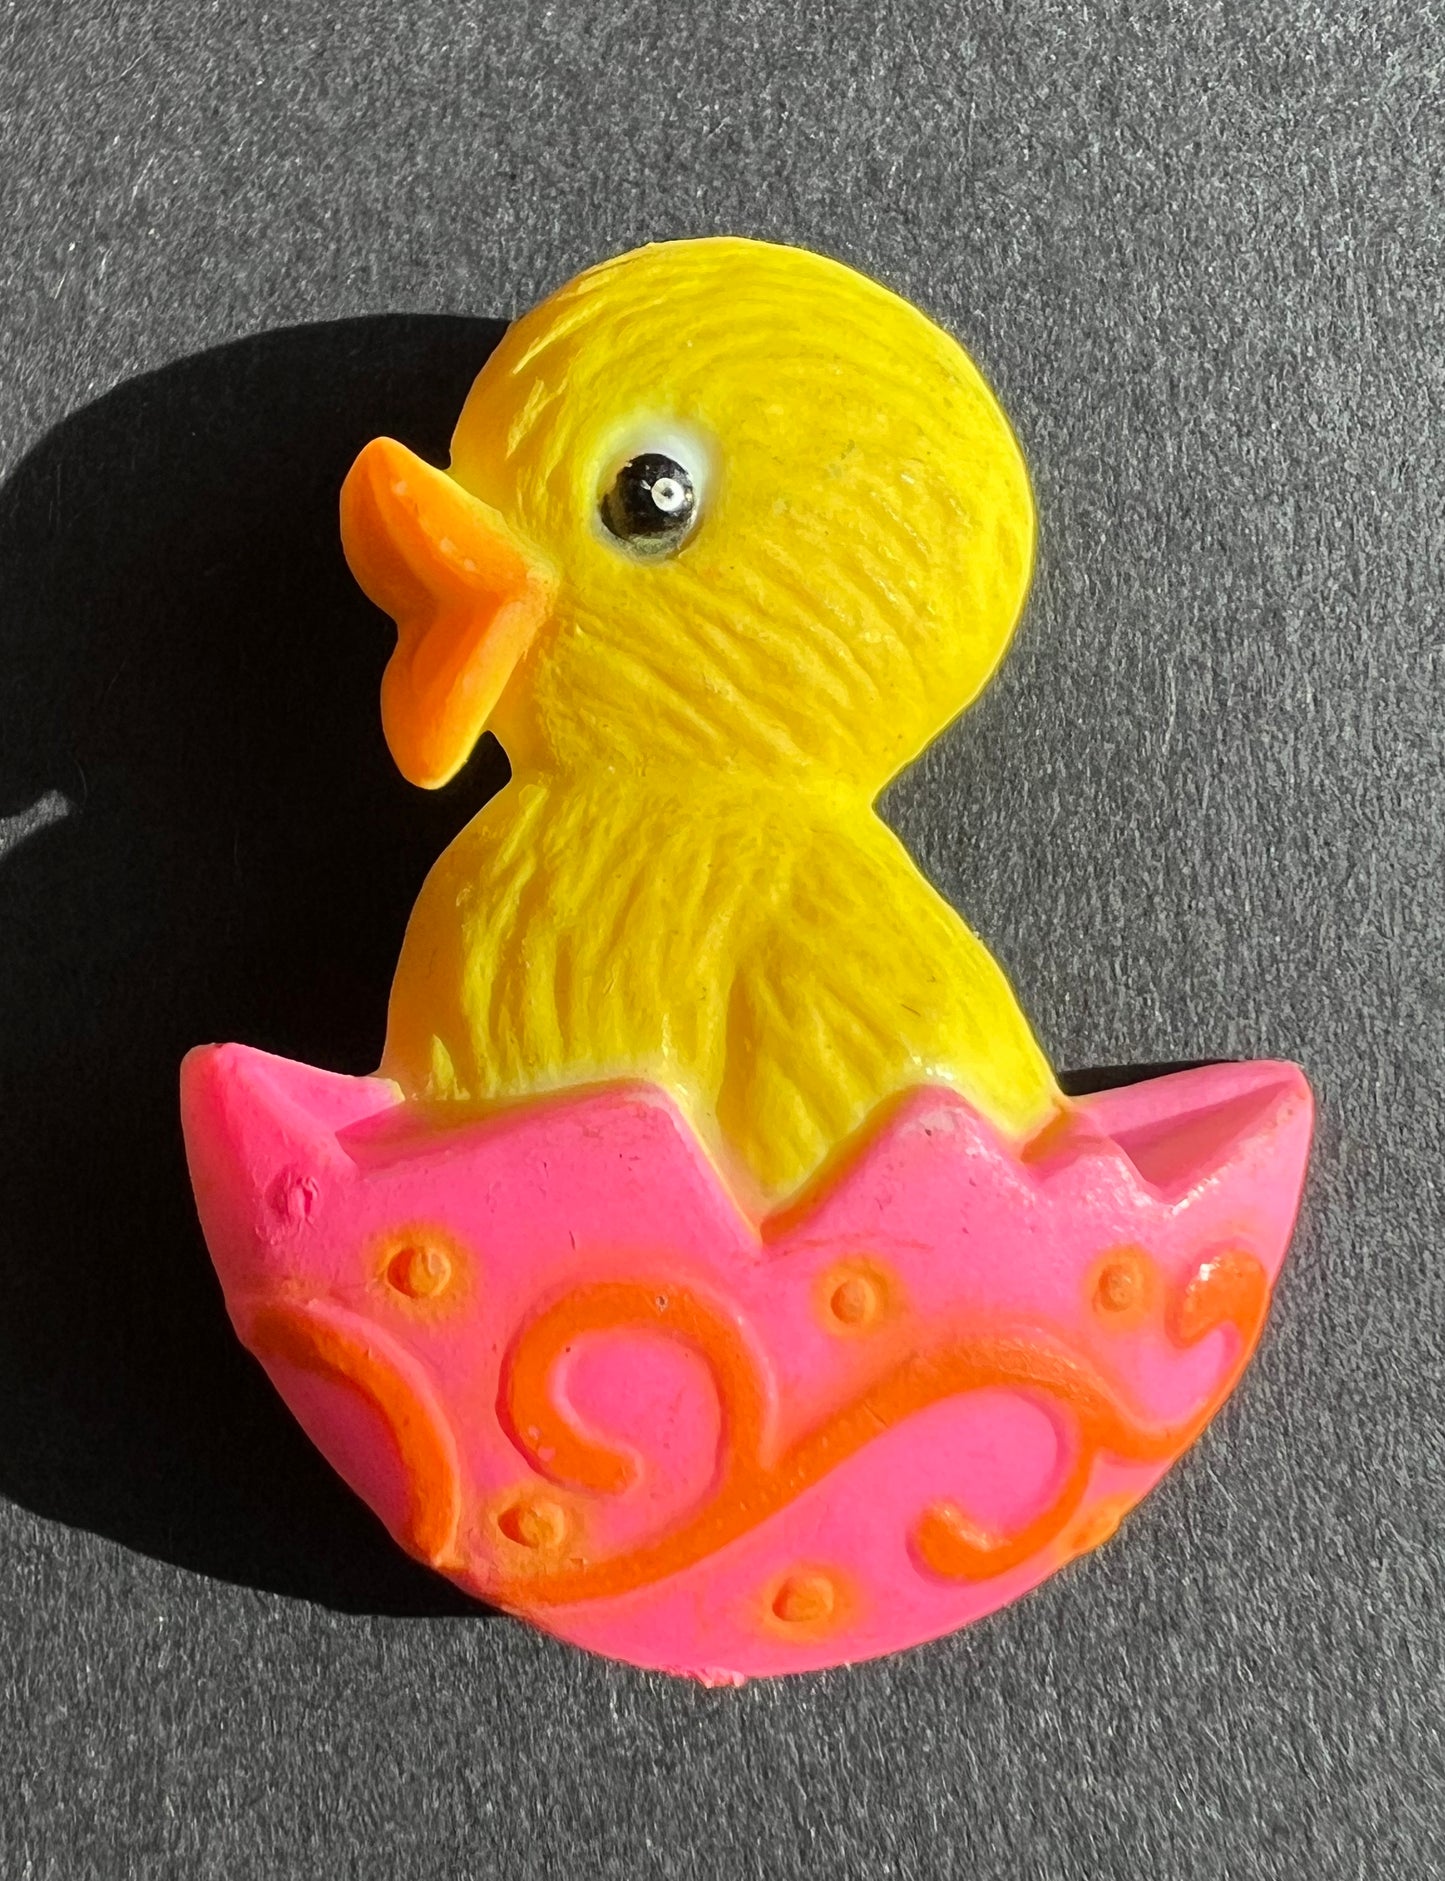 Sweet 1970s Easter Bunny or Chick Brooches